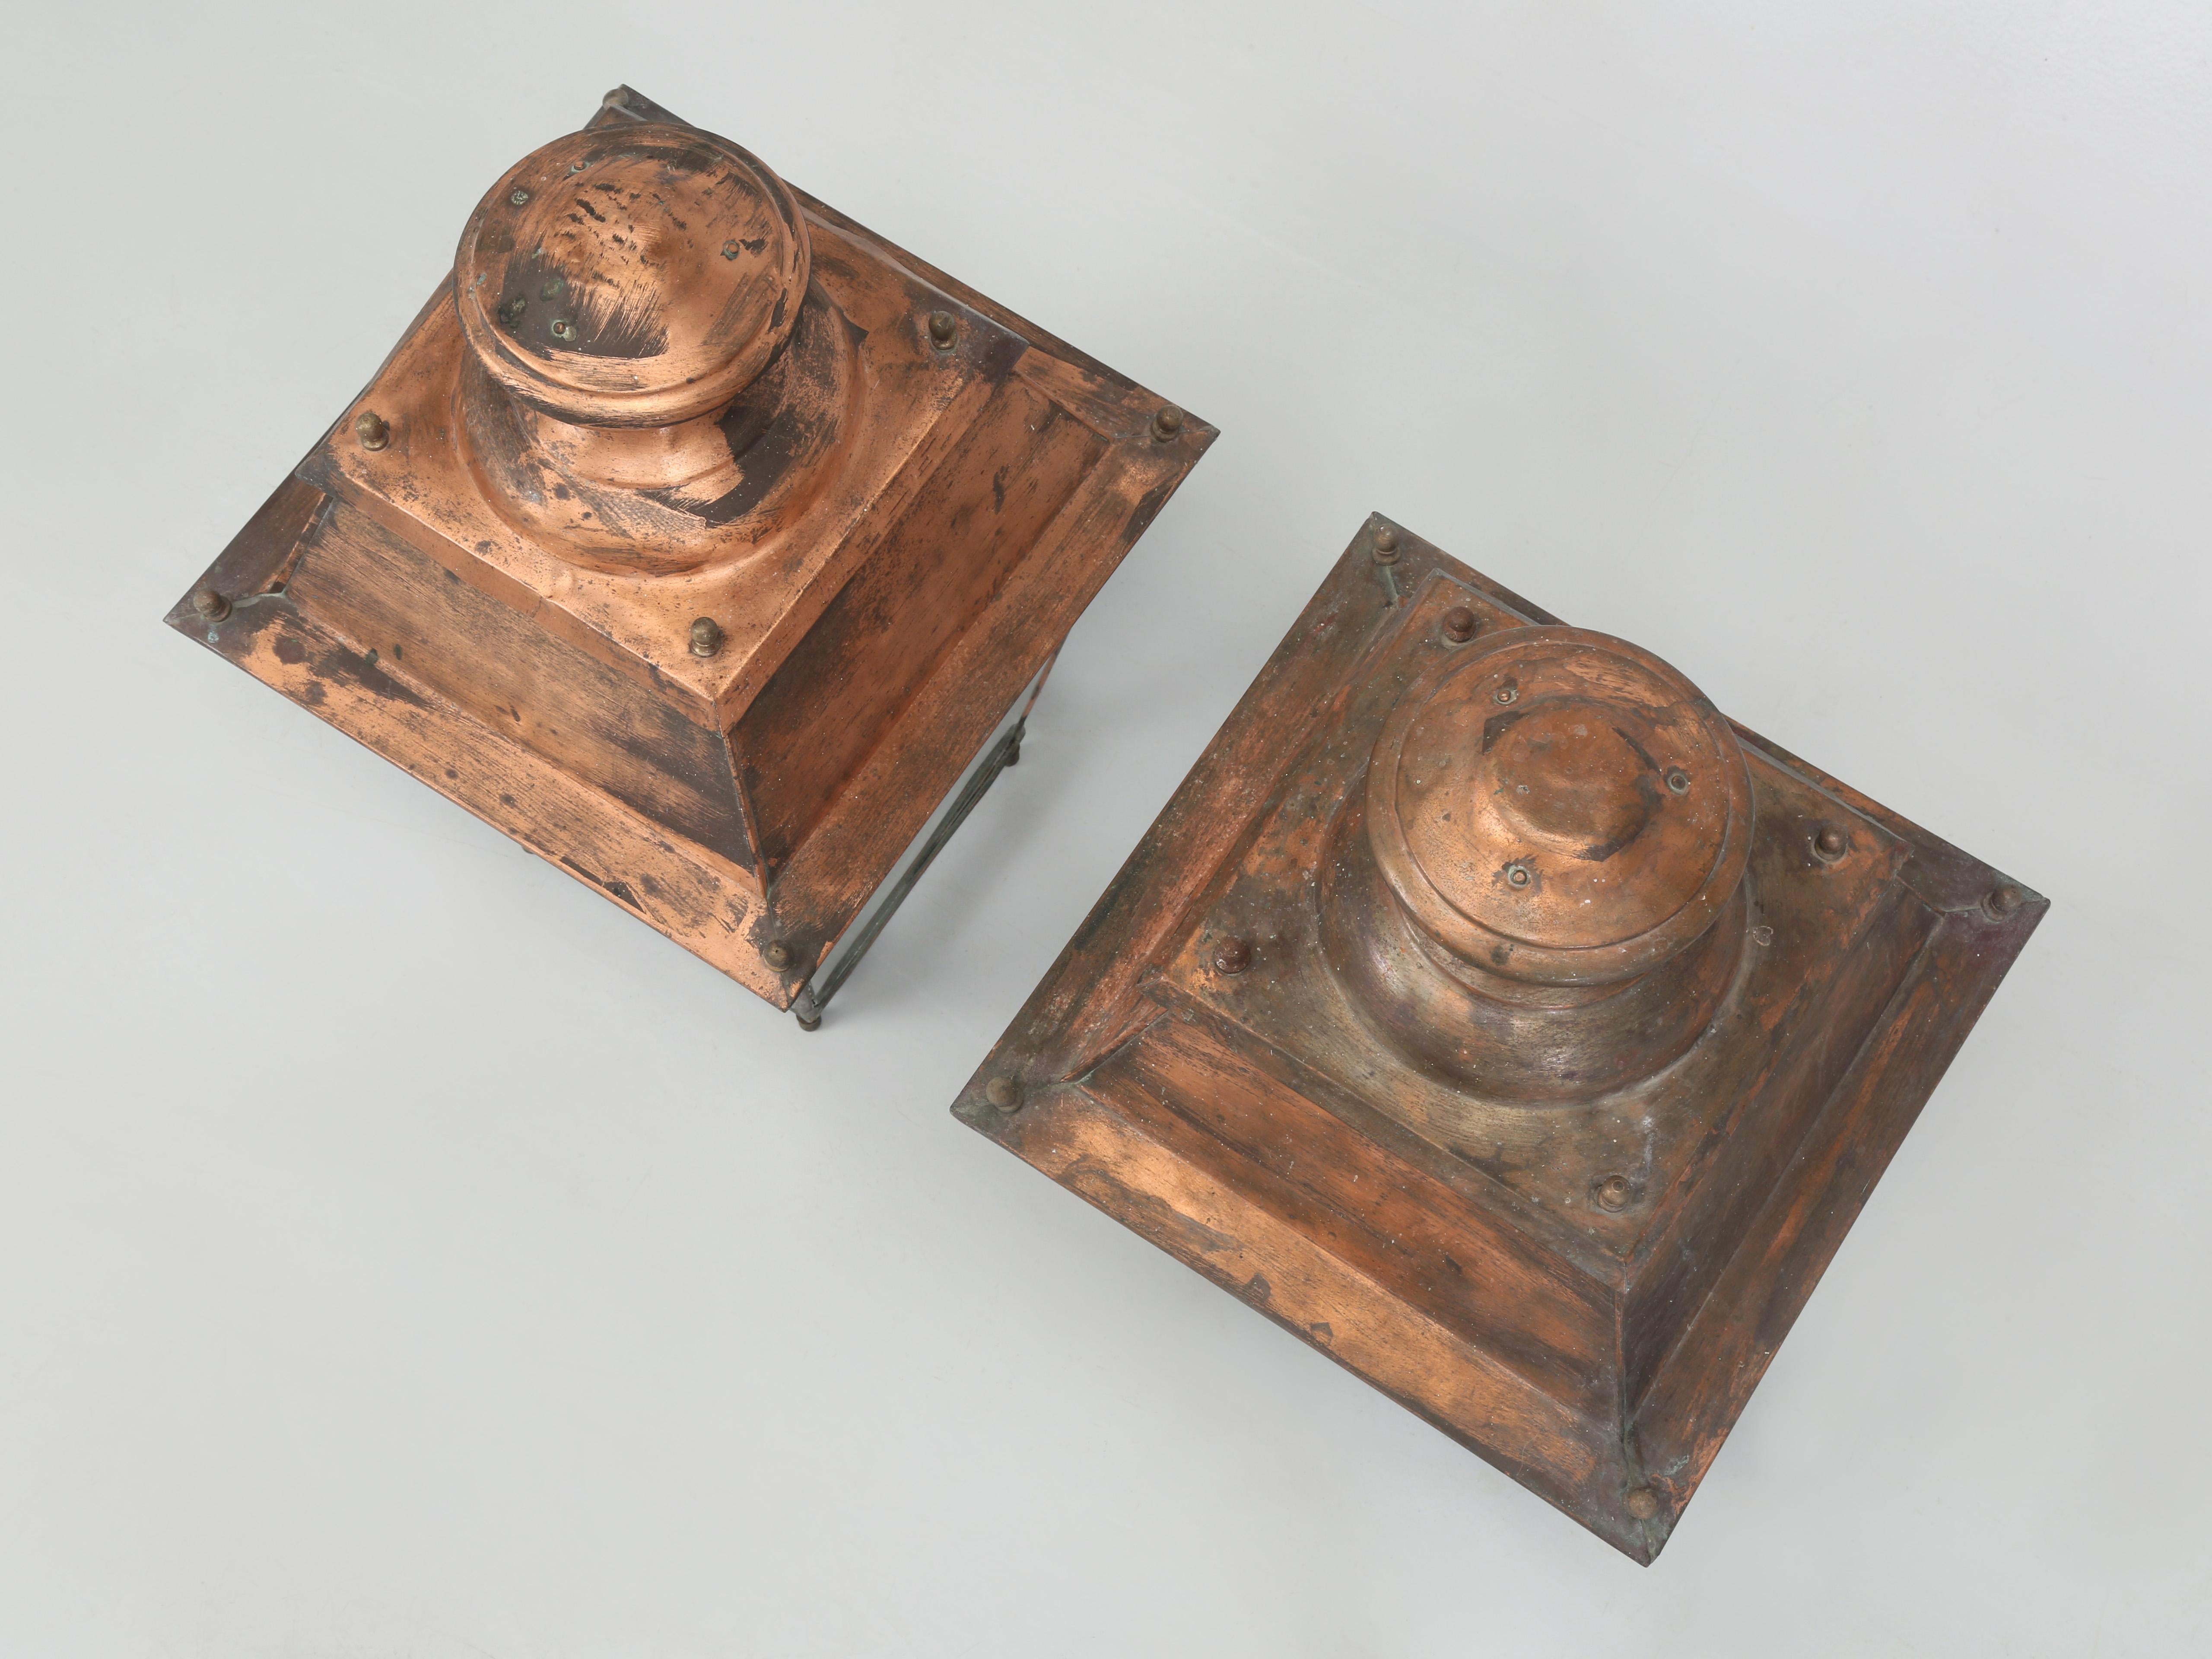 Hand-Crafted Pair of Vintage French Copper Lanterns from Toulouse France Unrestored Condition For Sale